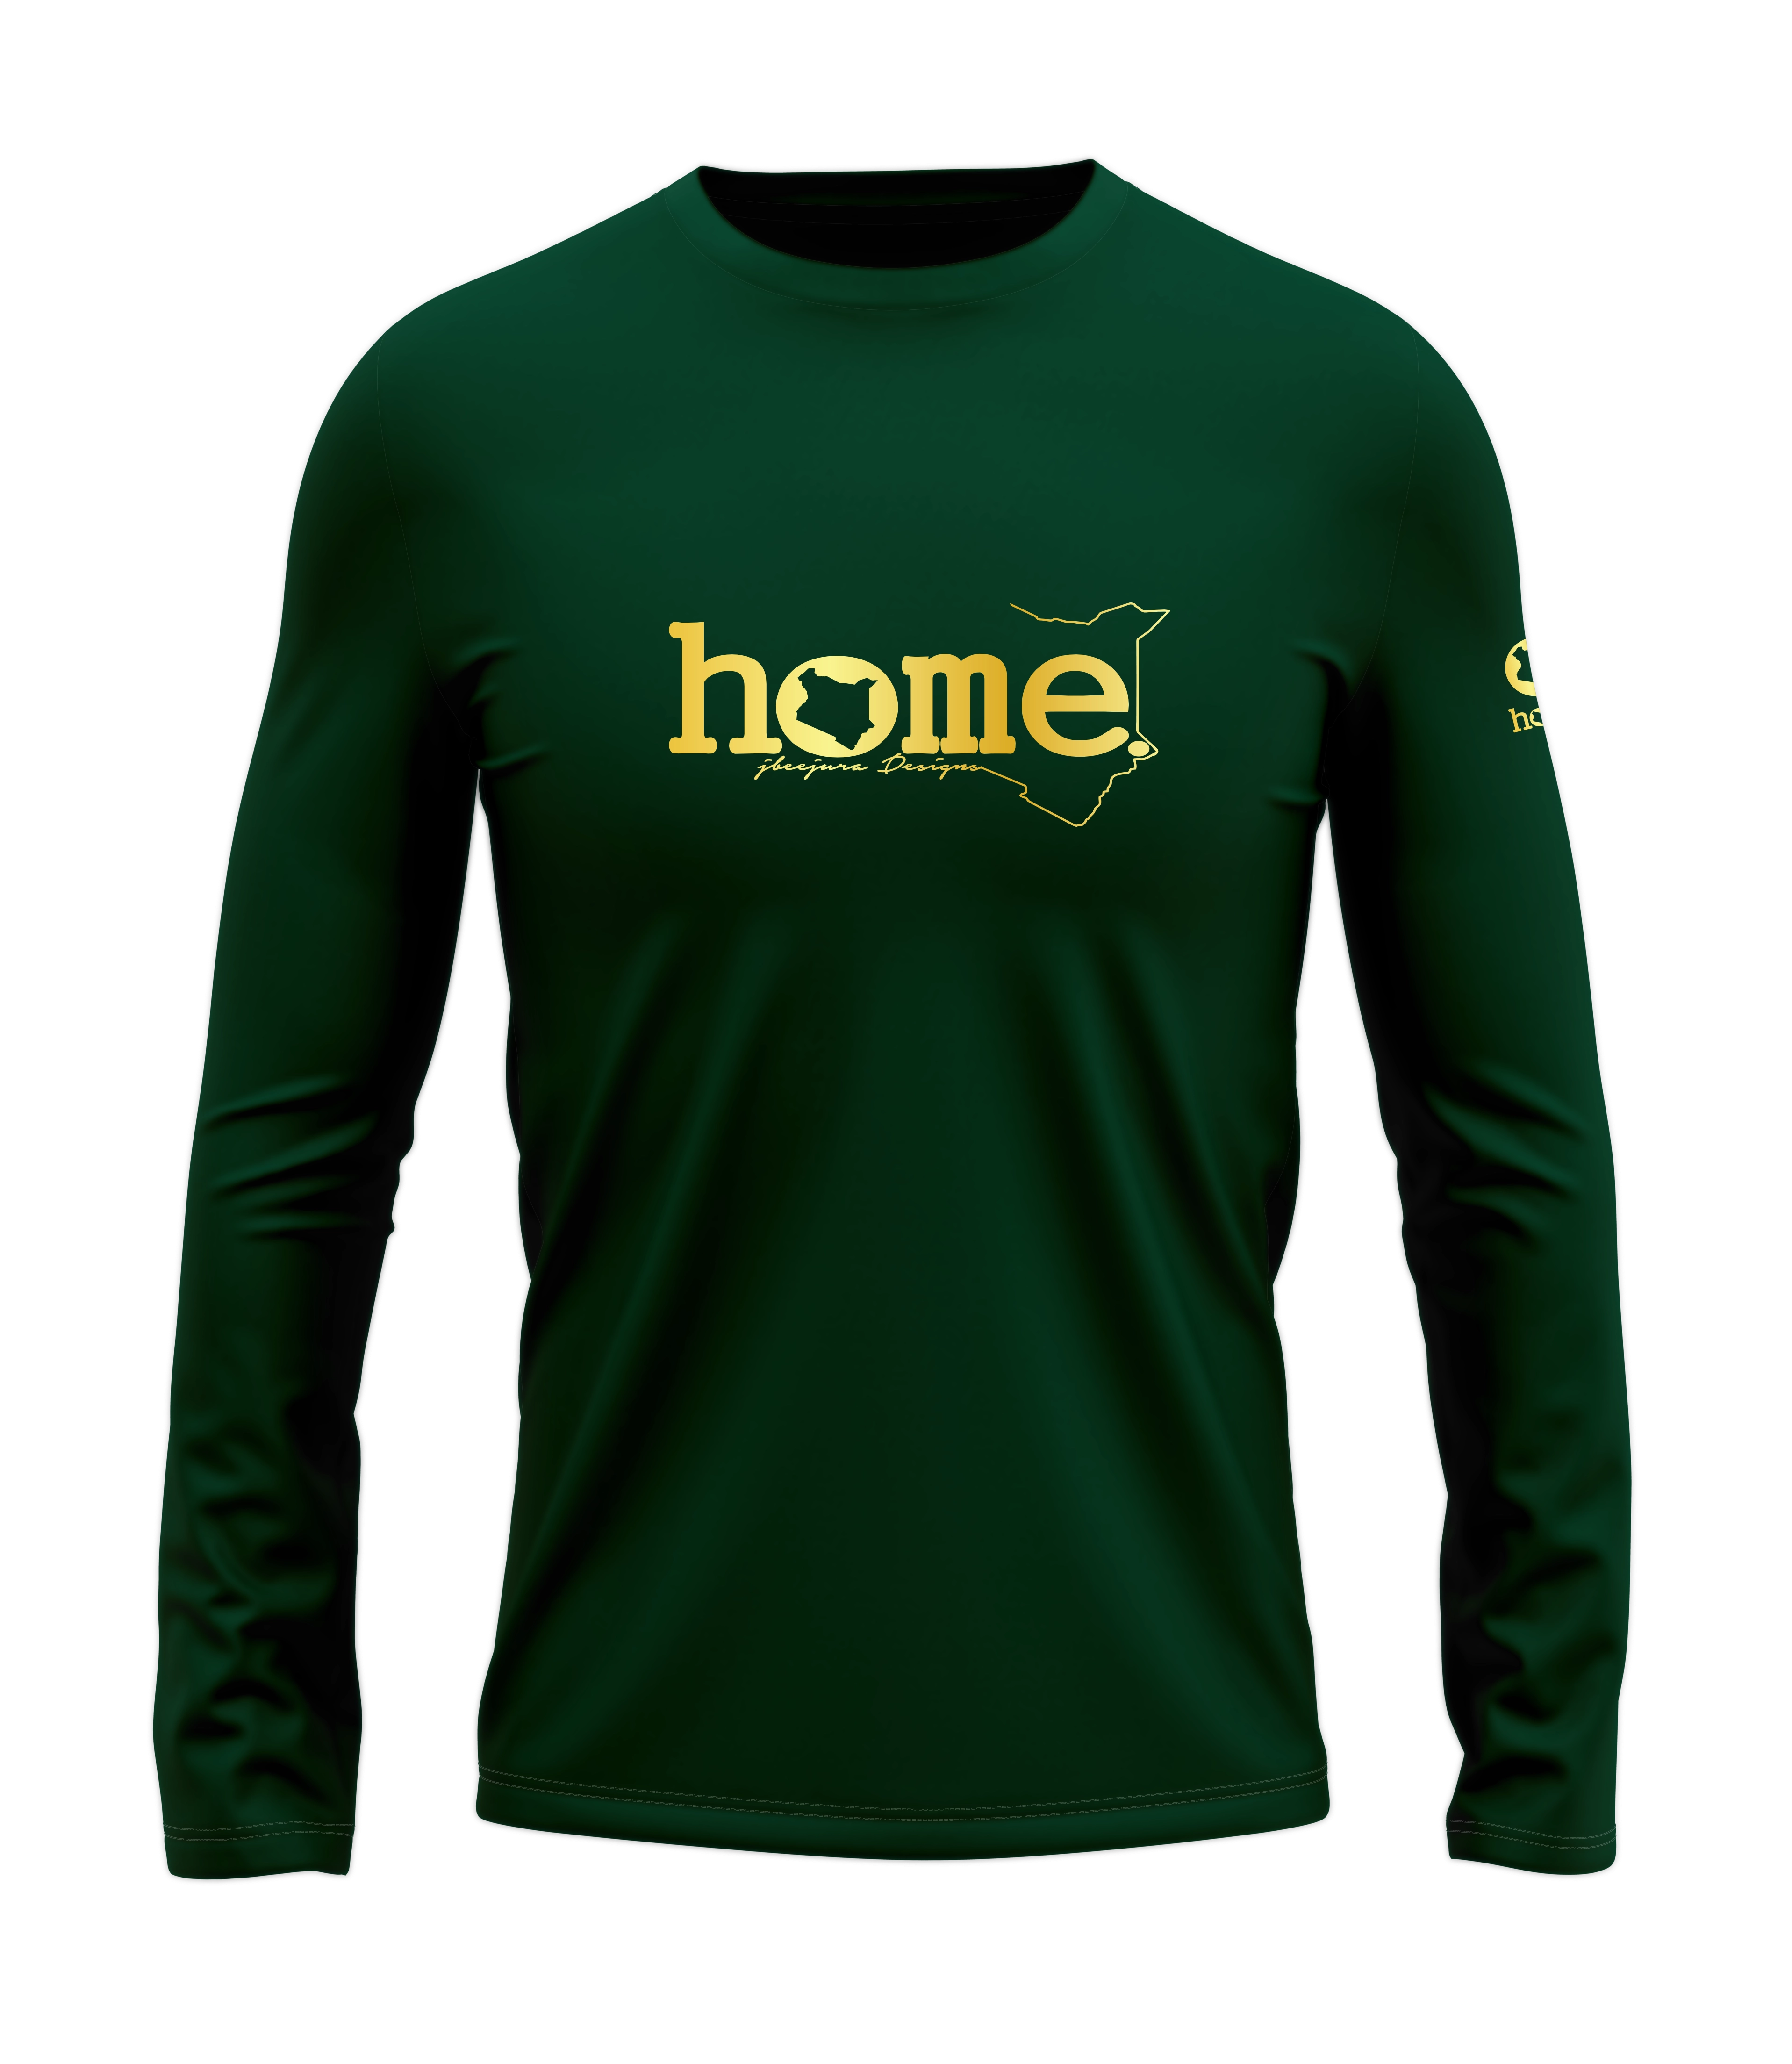 home_254 LONG-SLEEVED RICH GREEN T-SHIRT WITH A GOLD CLASSIC WORDS PRINT – COTTON PLUS FABRIC